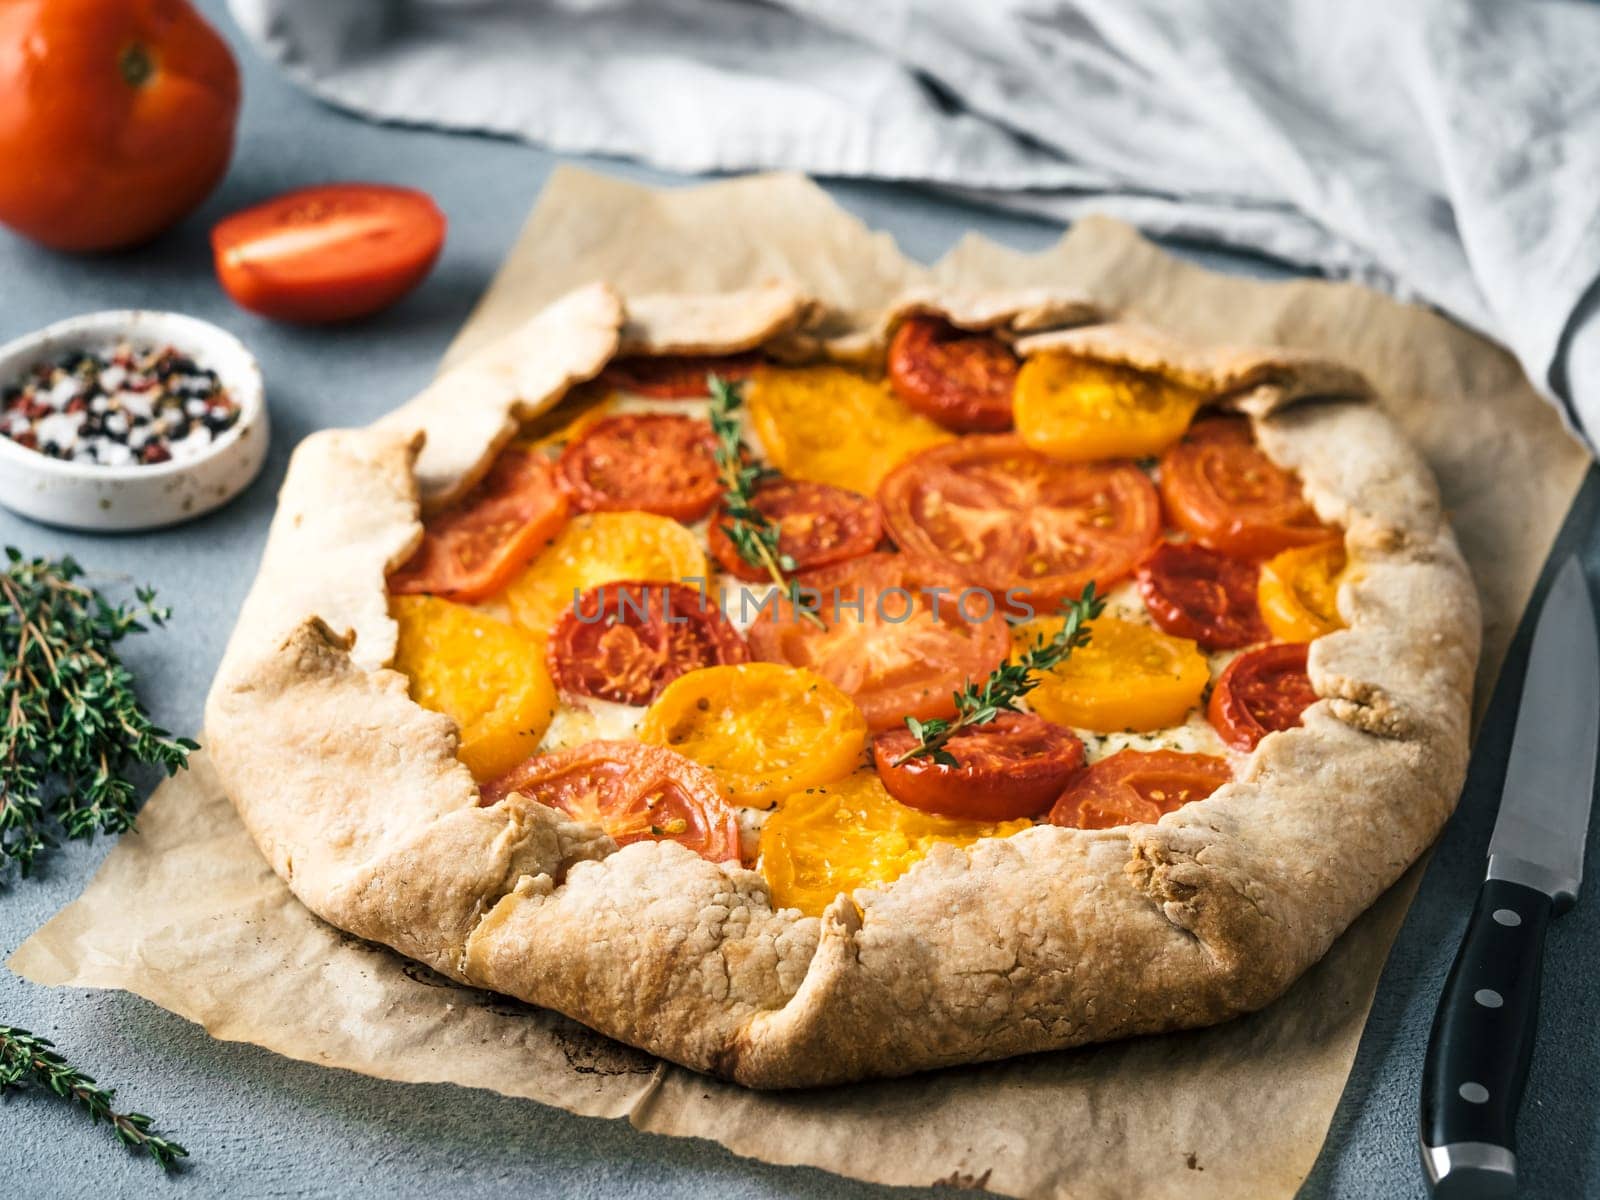 tomatoes and cheese tart or galette by fascinadora